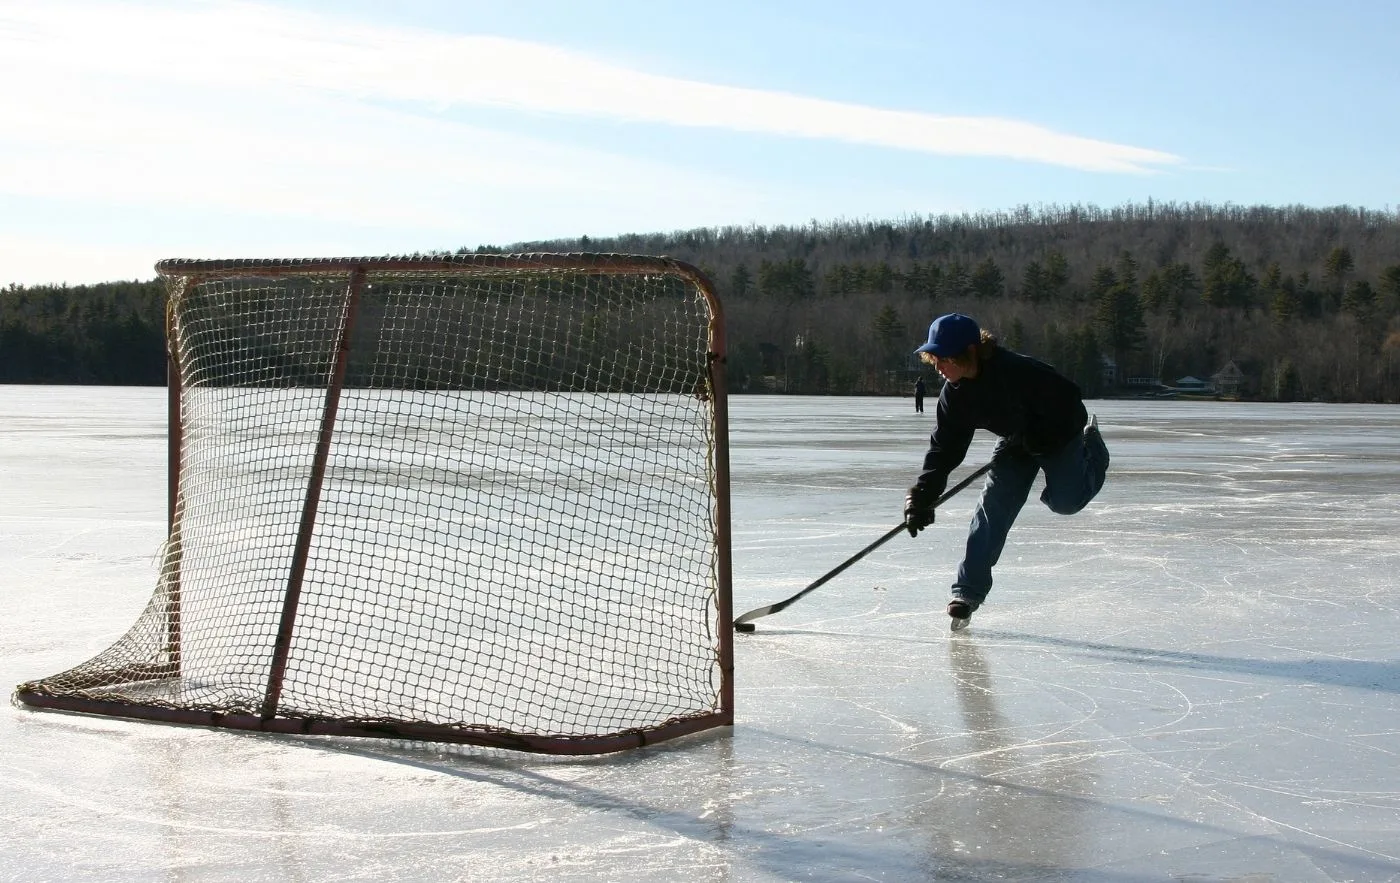 Skater playing hockey on a pond in upstate NY. 